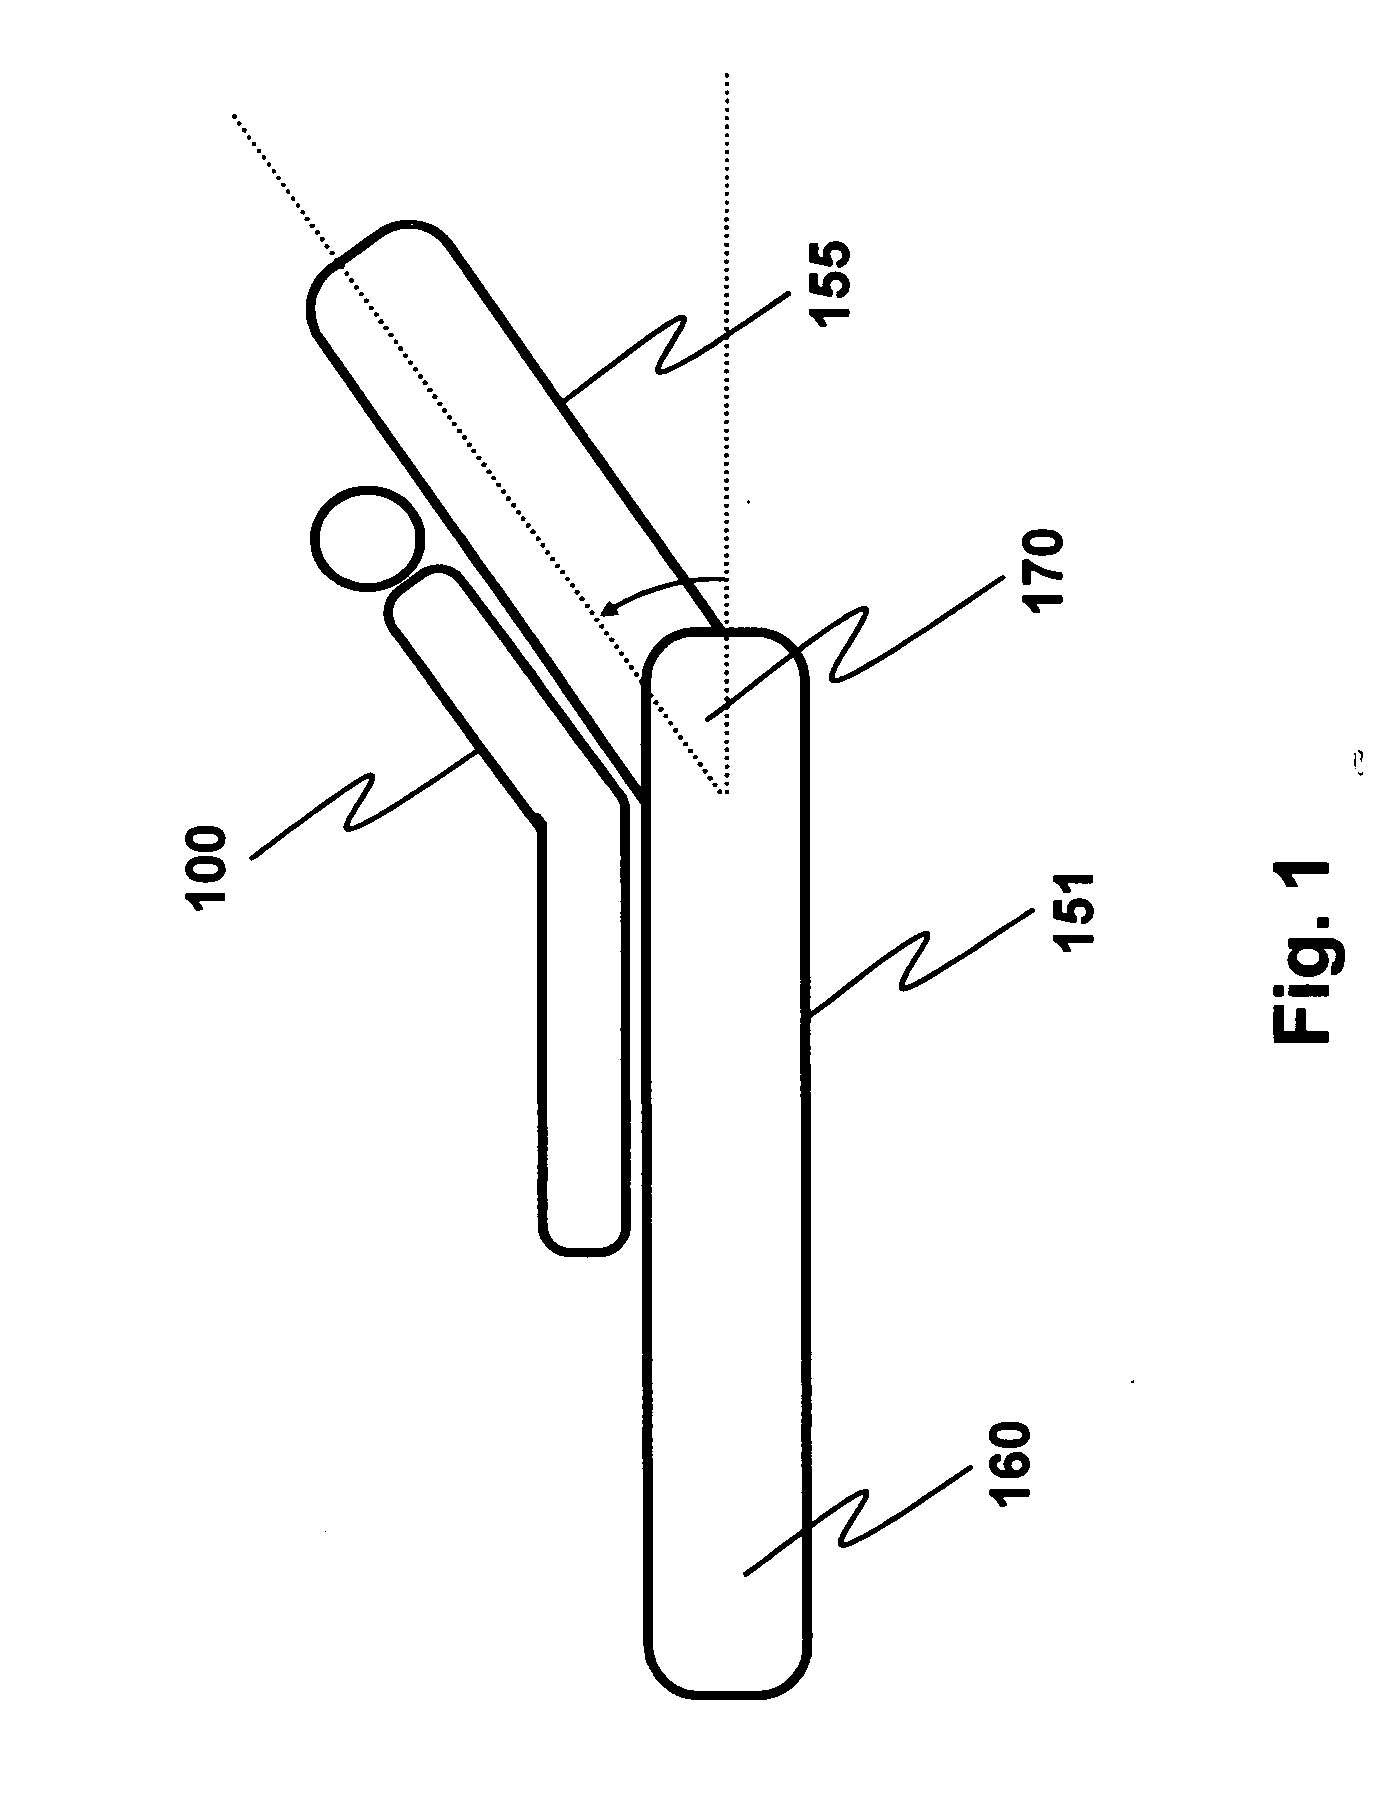 Anti-aspiration device with content monitoring functionality